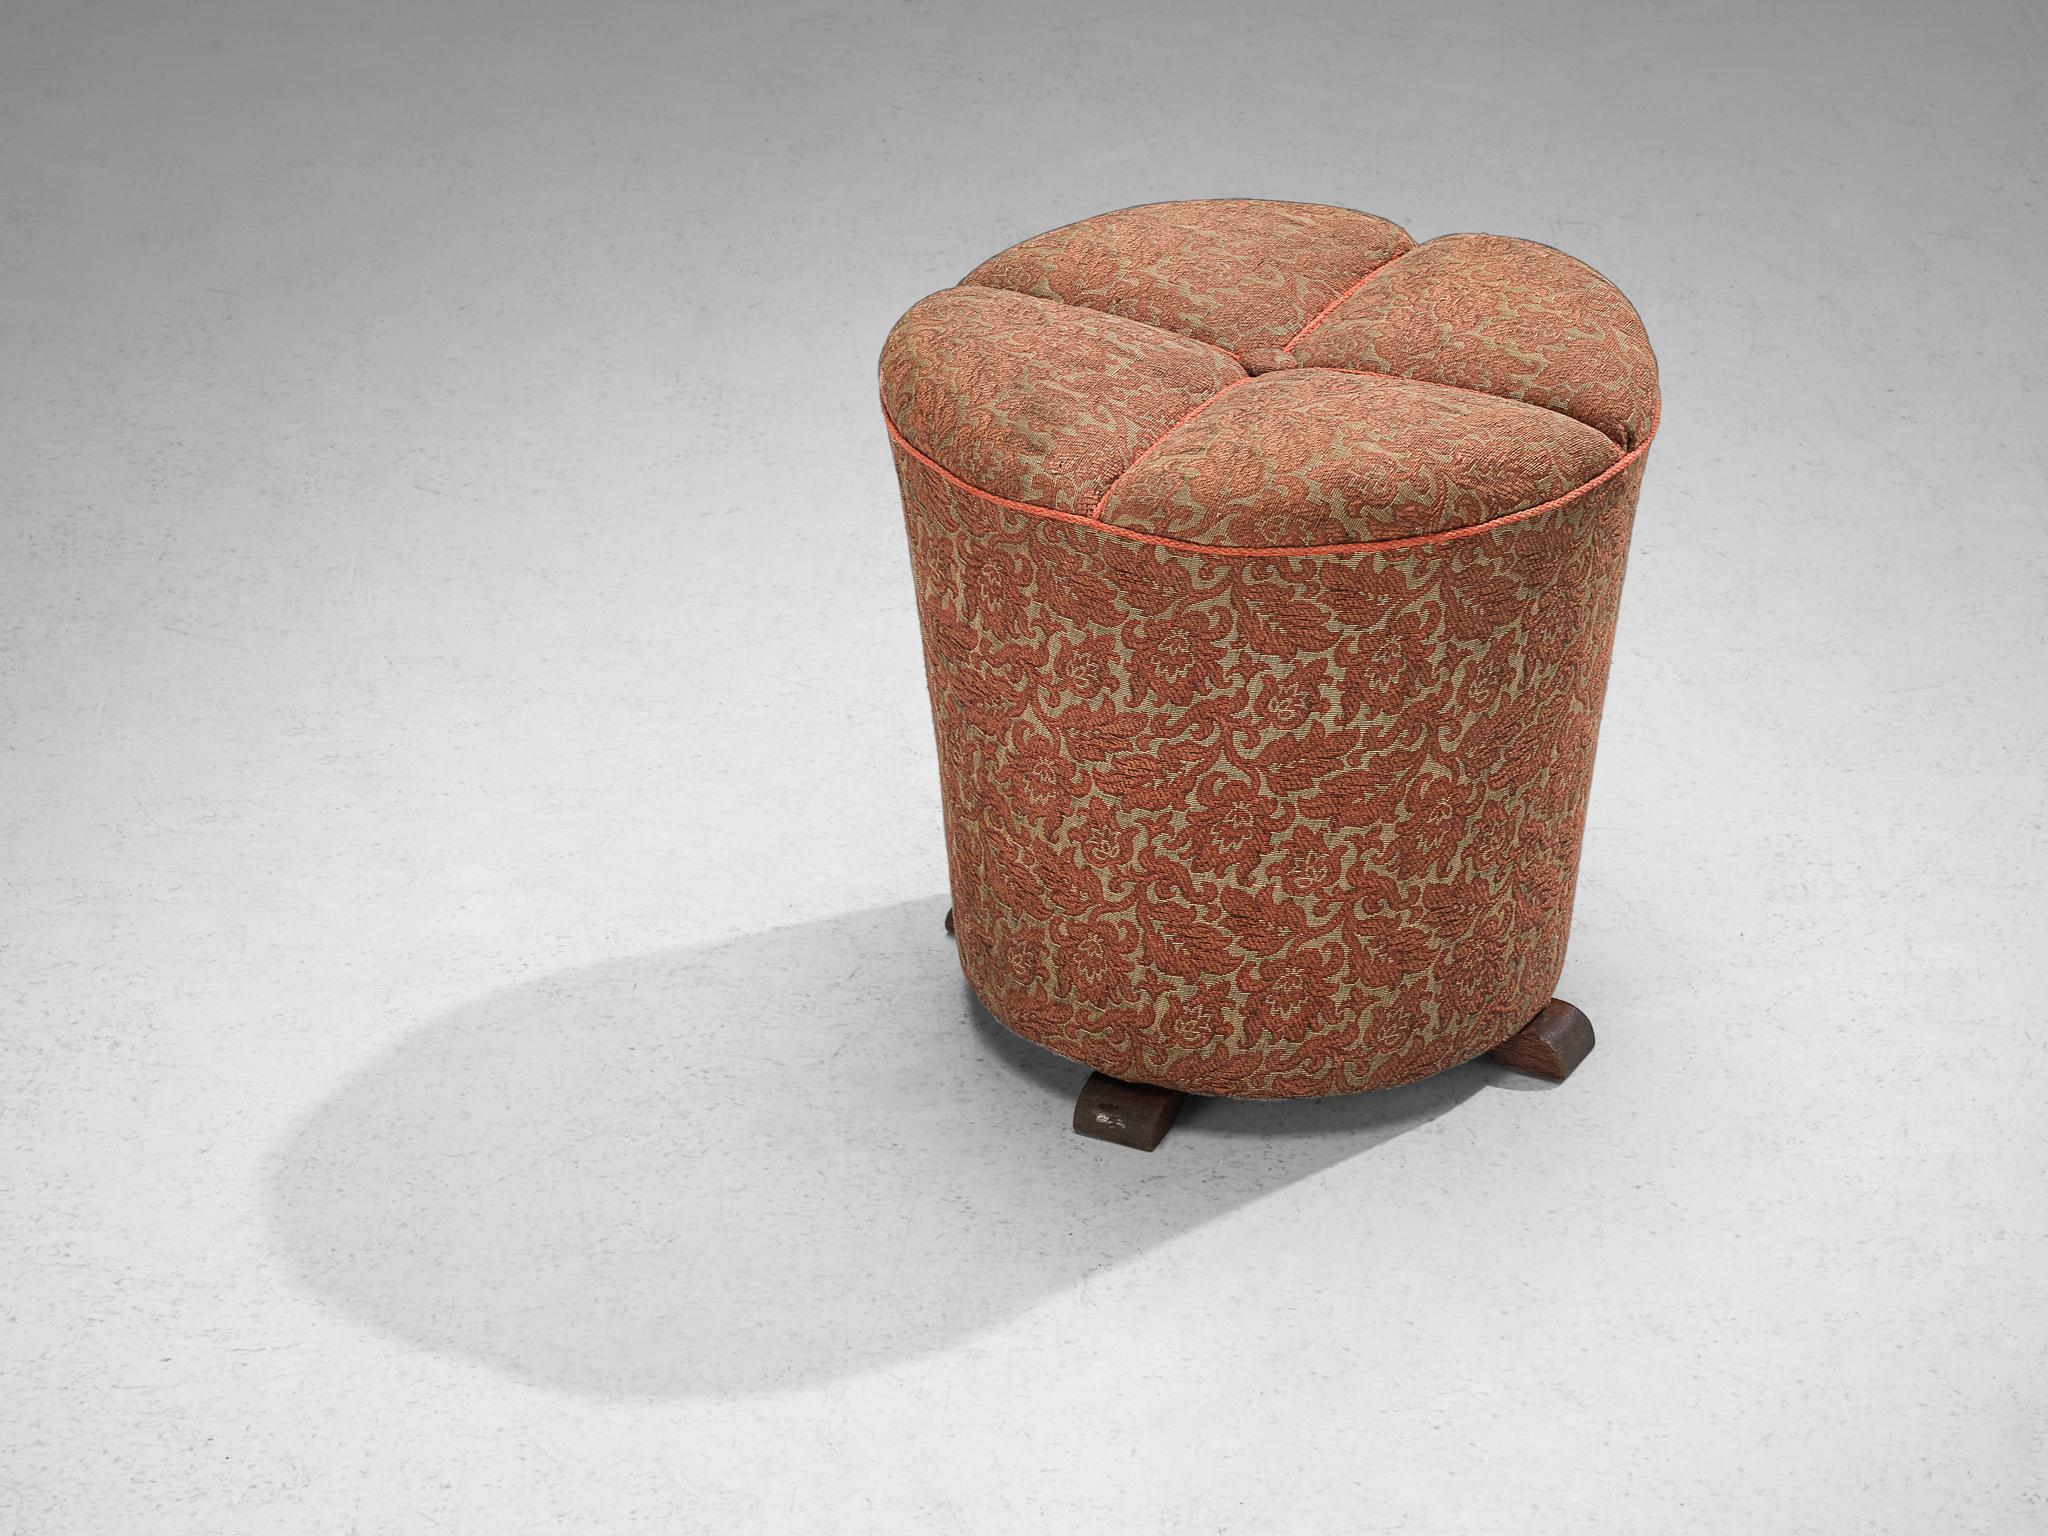 Jindrich Halabala for UP Závody, footstool, tabouret, ottoman, fabric, oak, Czech Republic, 1930s.

This poetic pouf is designed in the 1930s when the Art Deco Period was at its highest point and distinguishes itself by means of artistic upholstery